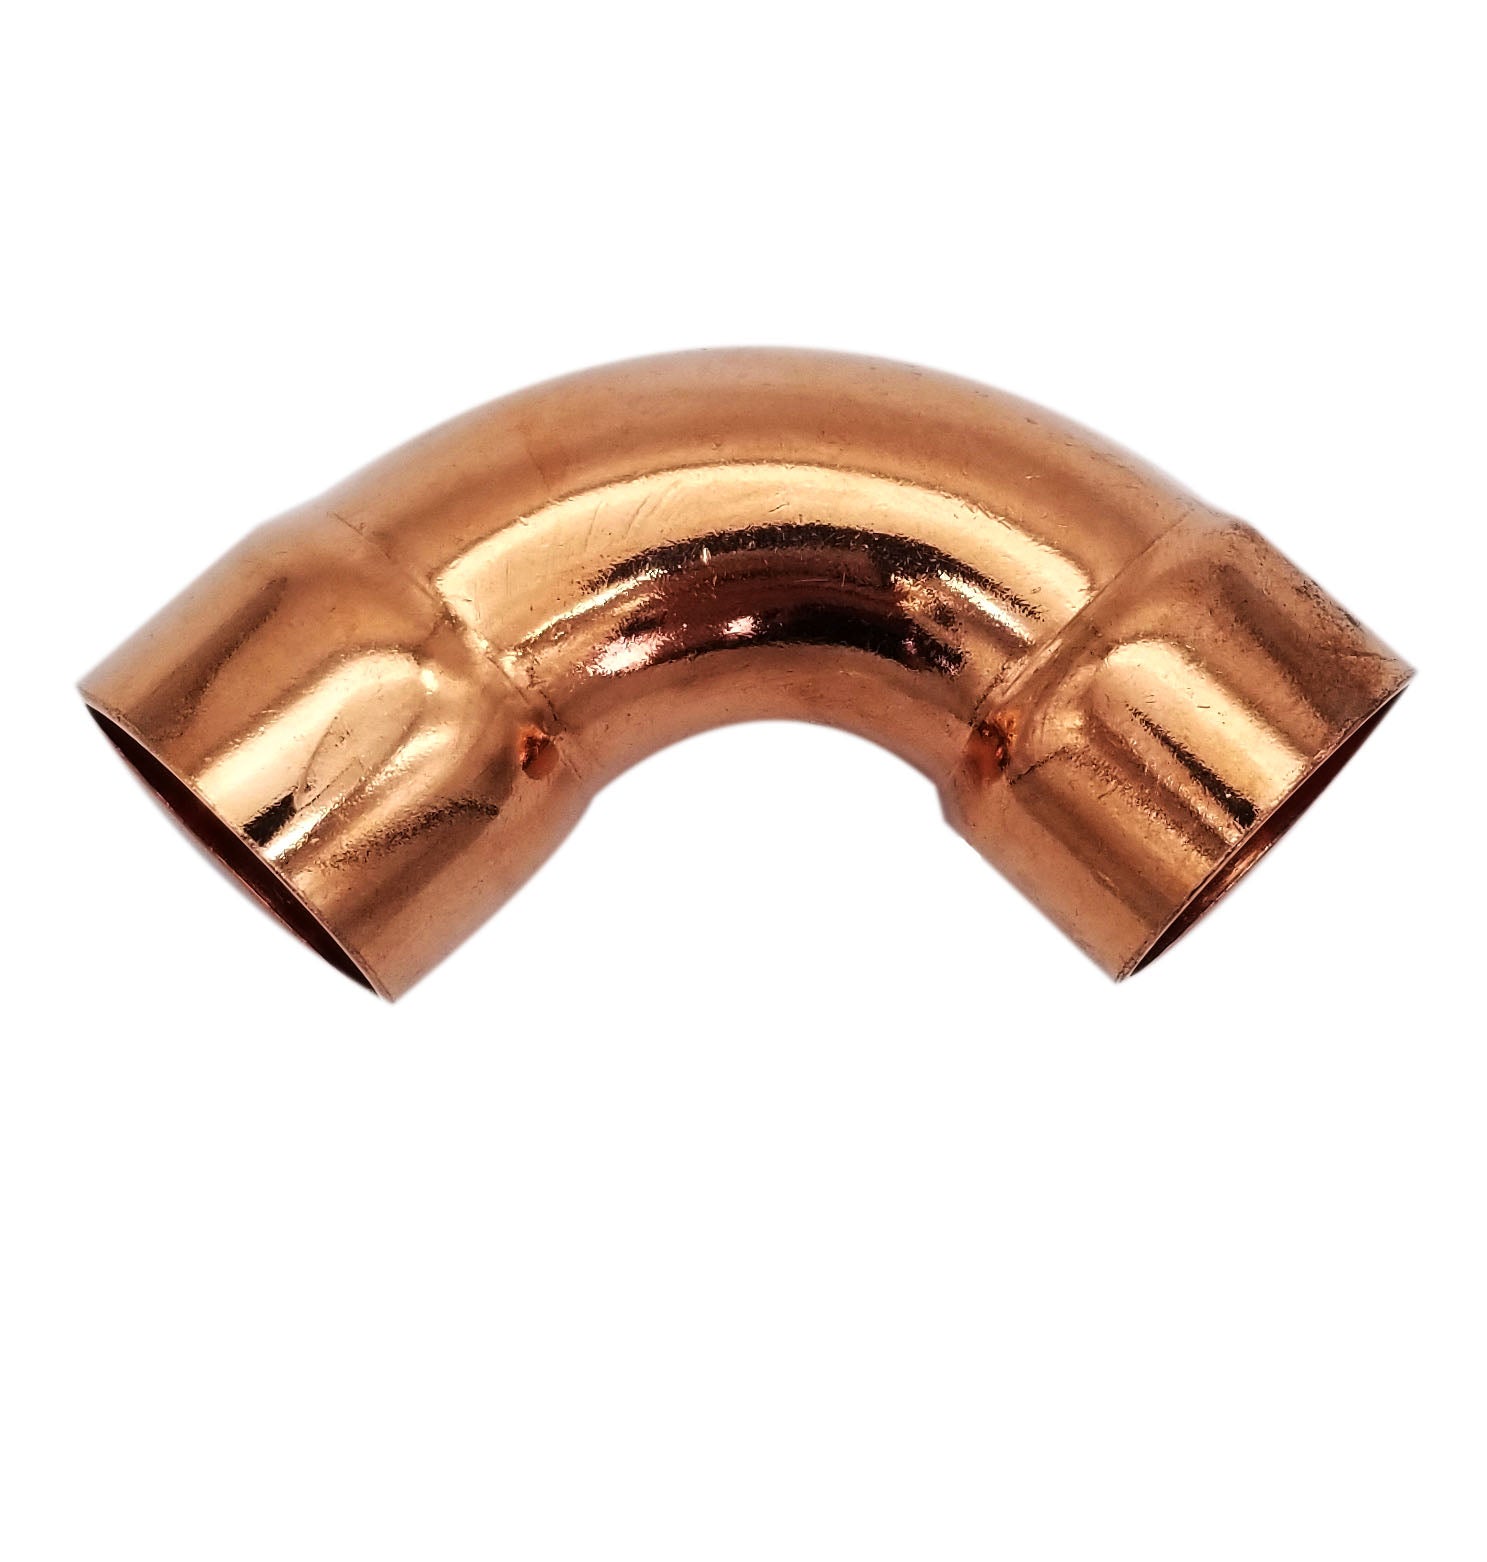 Copper Fitting 1/2 Inch (HVAC Outer Dimension) 3/8 Inch (Plumbing Inner Dimension) - Copper Long Radius 90° Elbow Fitting with 2 Solder Cups & HVAC – 99.9% Pure Copper - 10 Pack